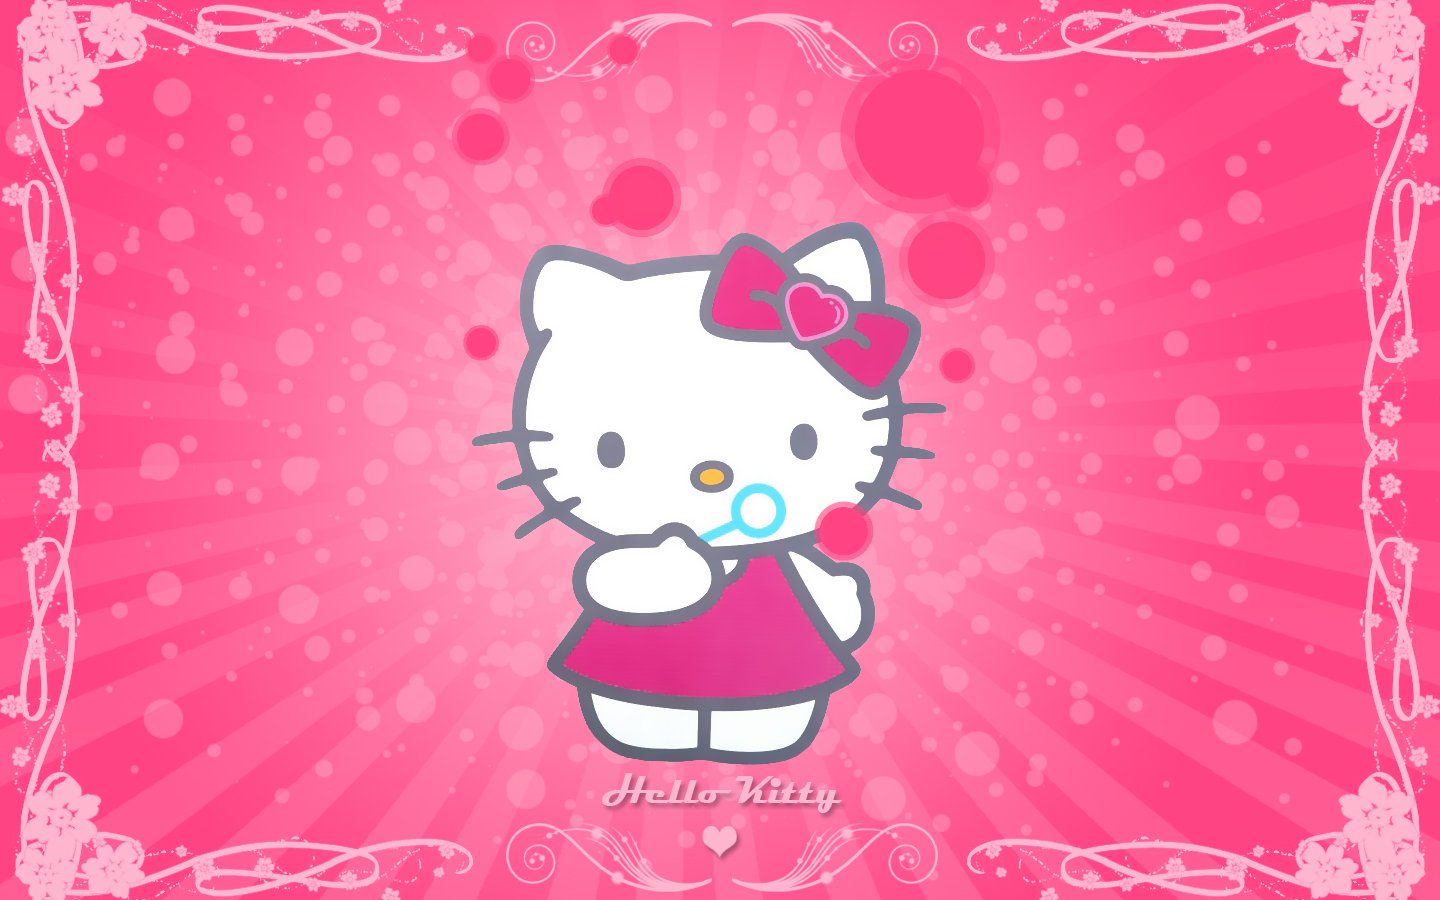 Hello Kitty Cute Pink Background Wallpaper with 1440x900 Resolution 1440x900